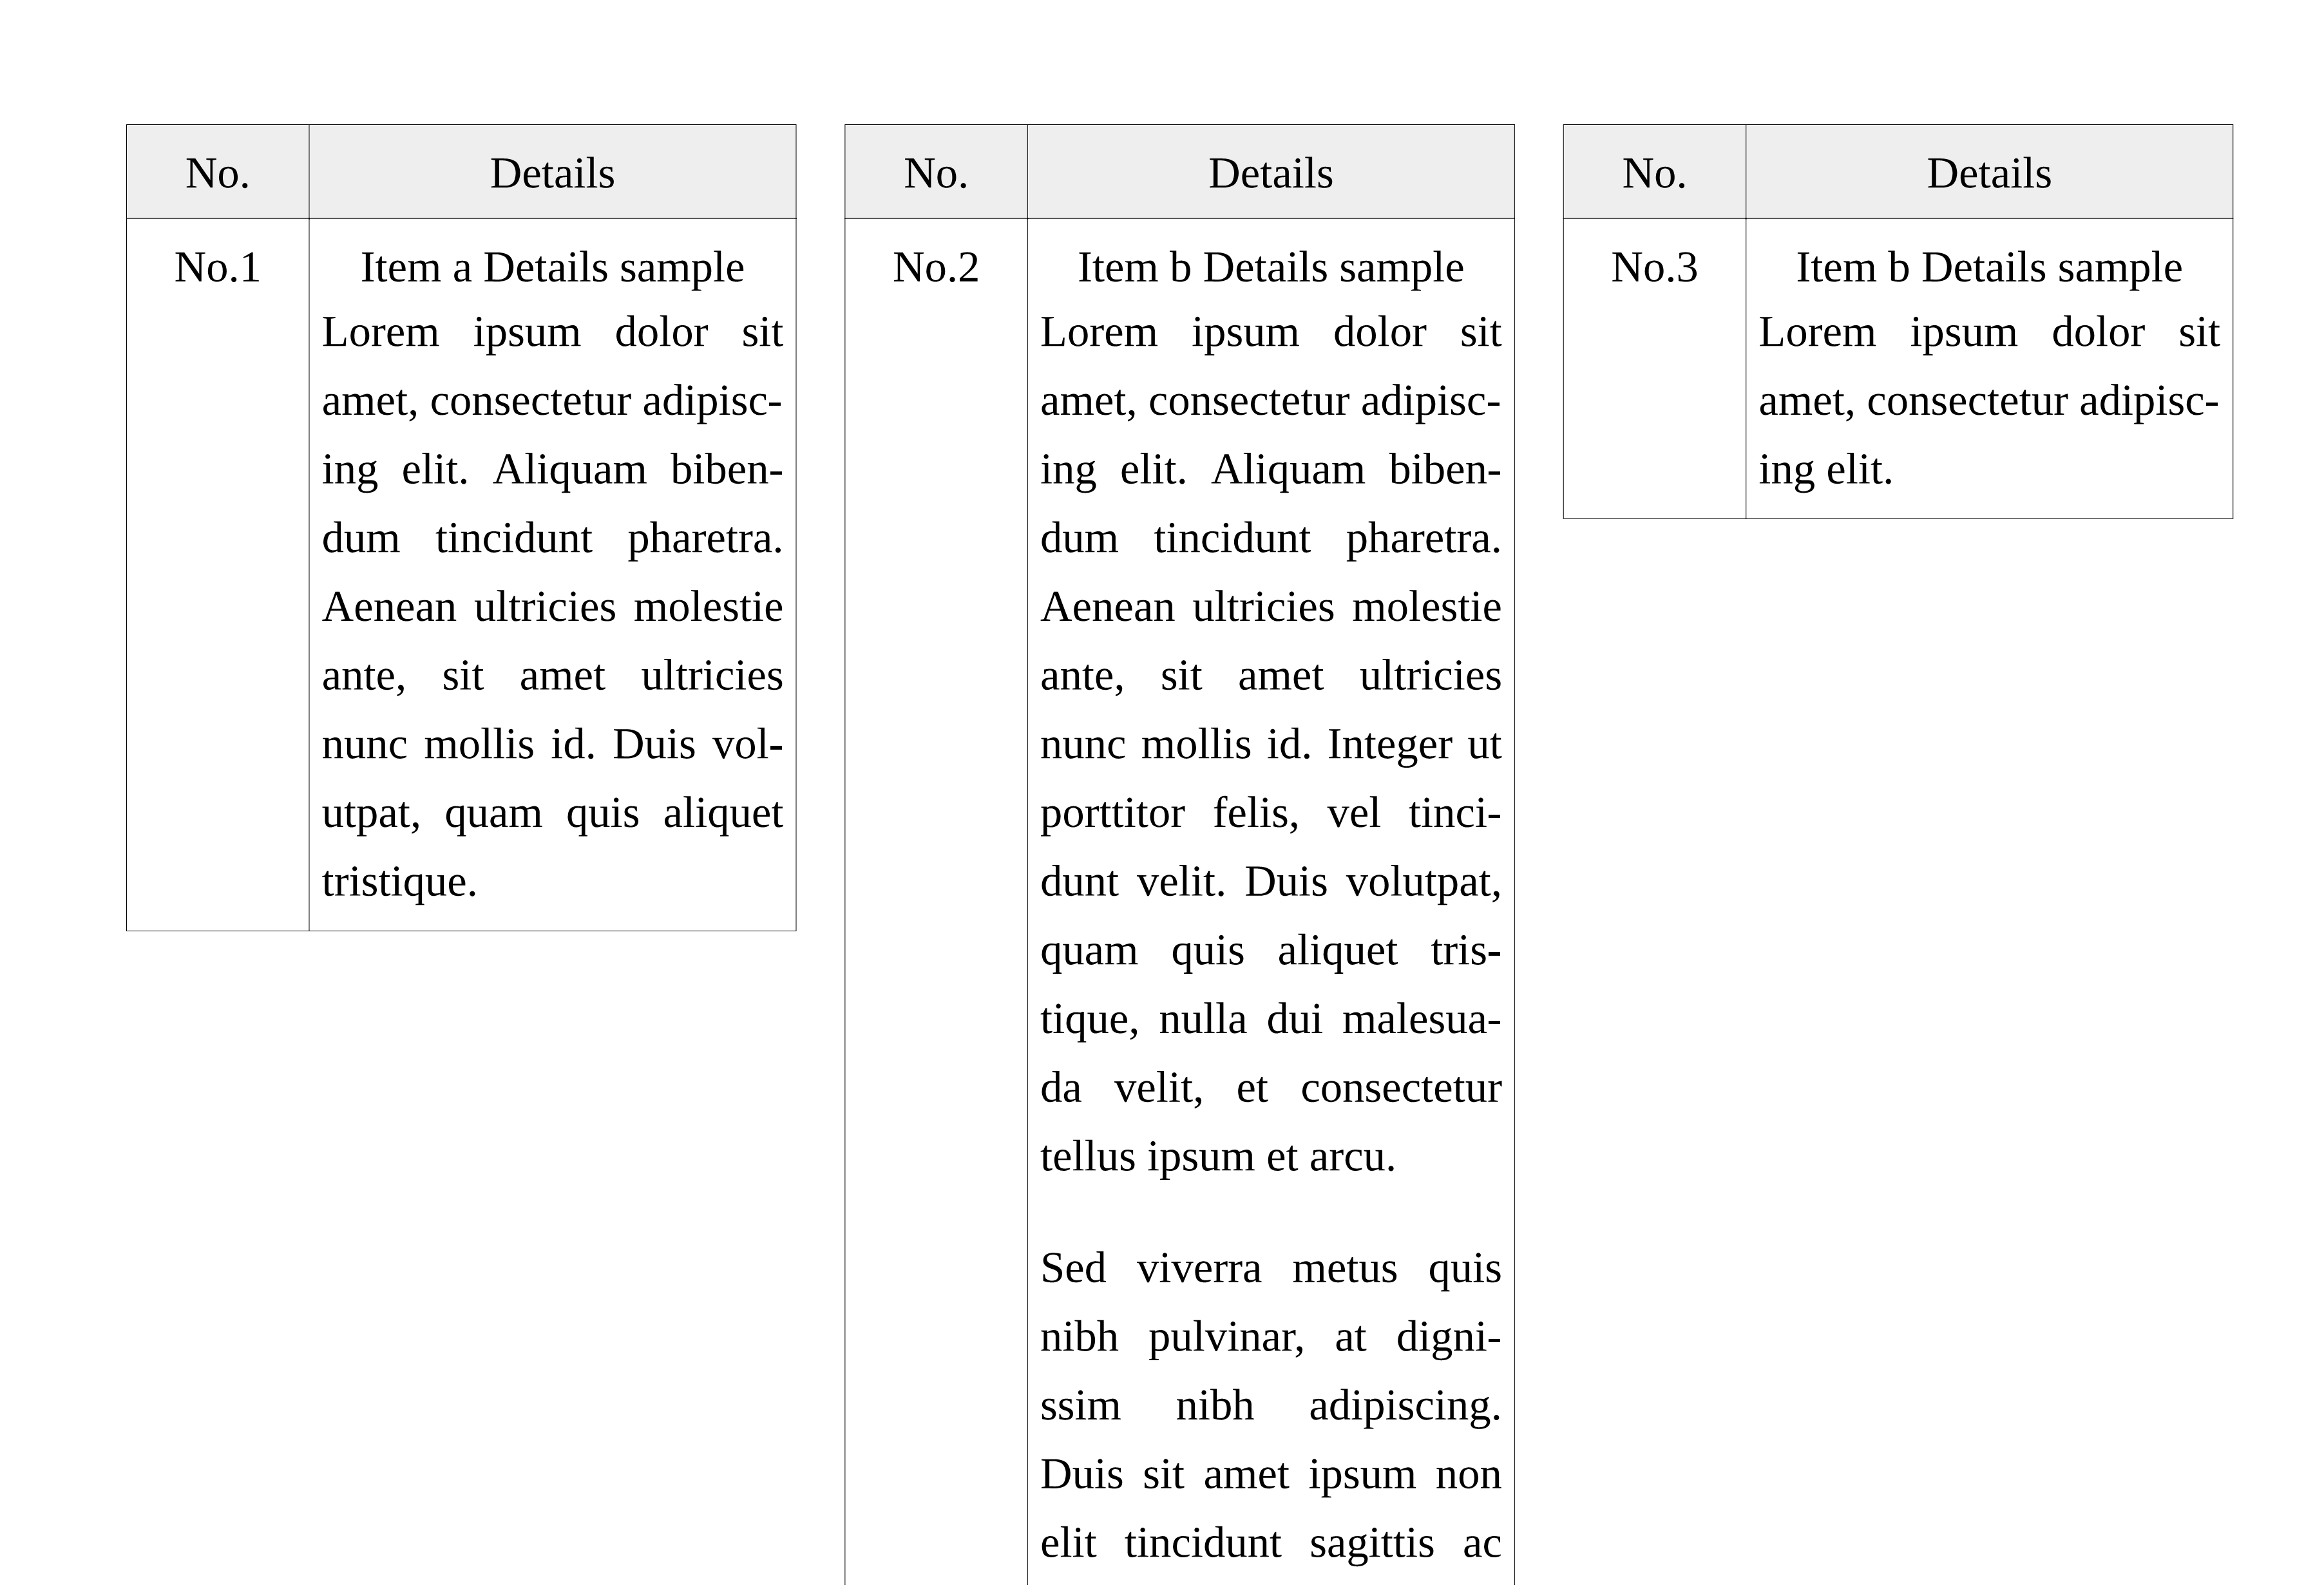 images/table-row-keep-together-2--epub--.png